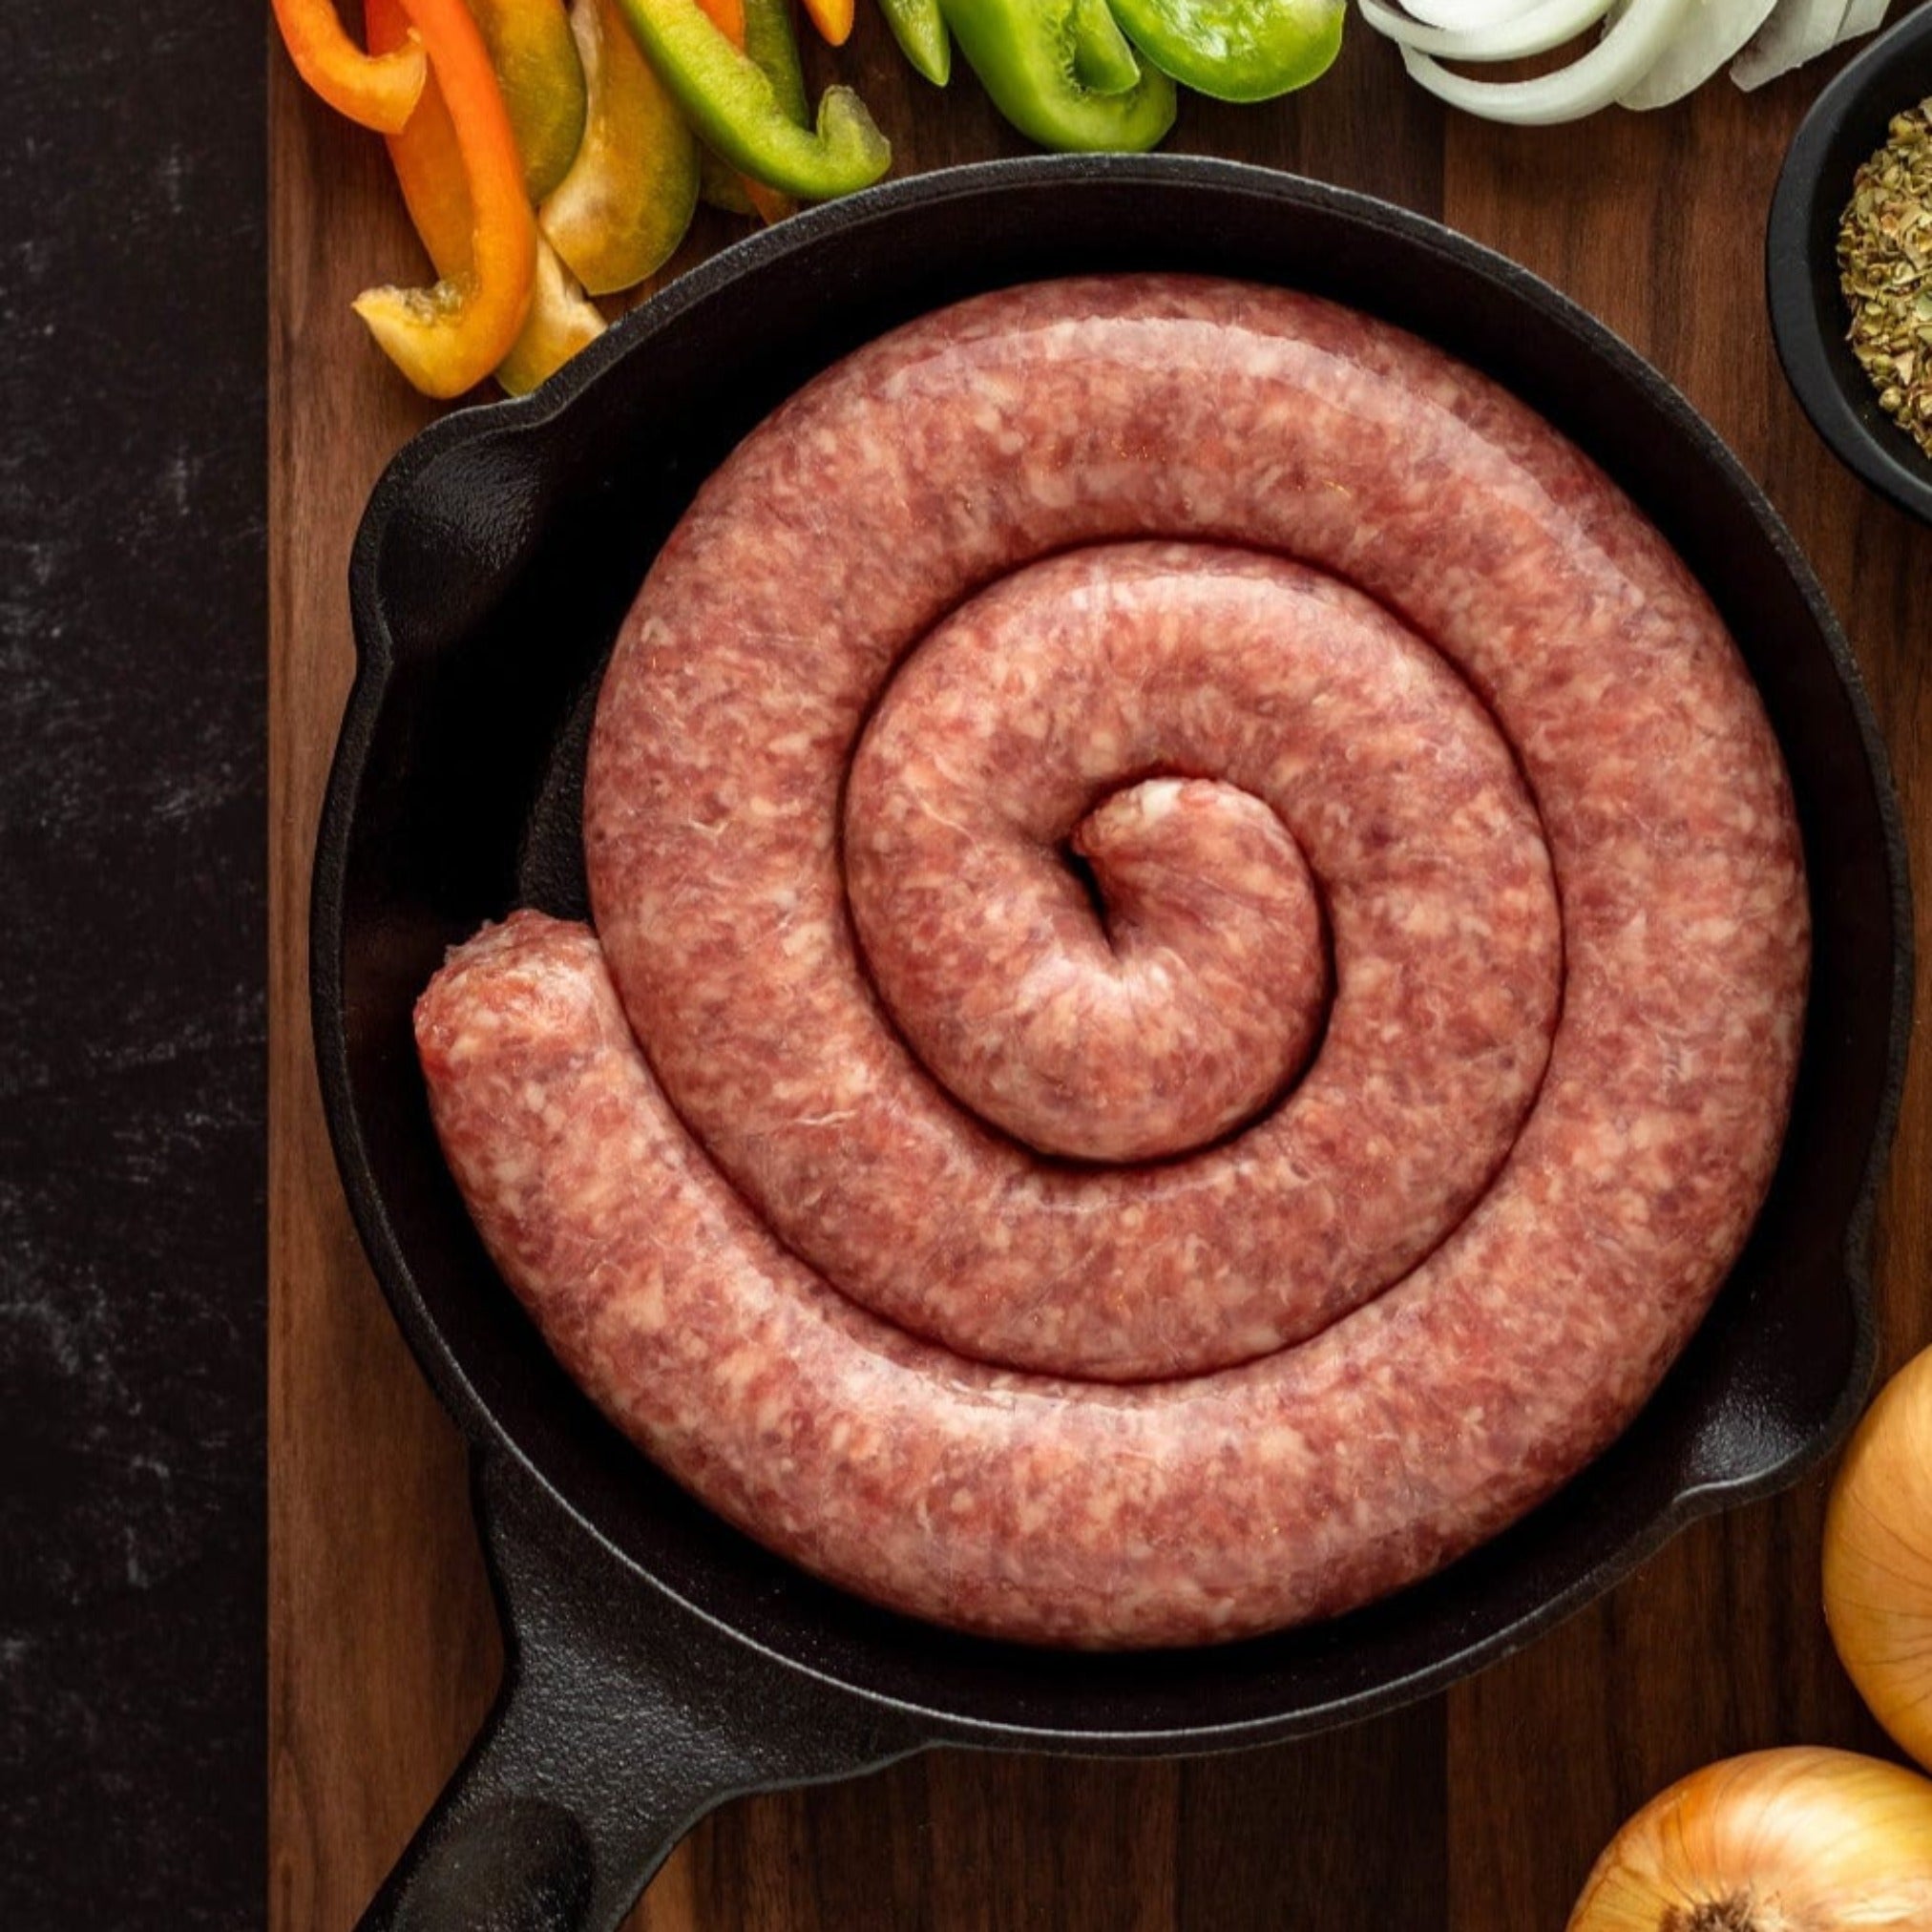 Rope Sausage - Stoltzfus Meats